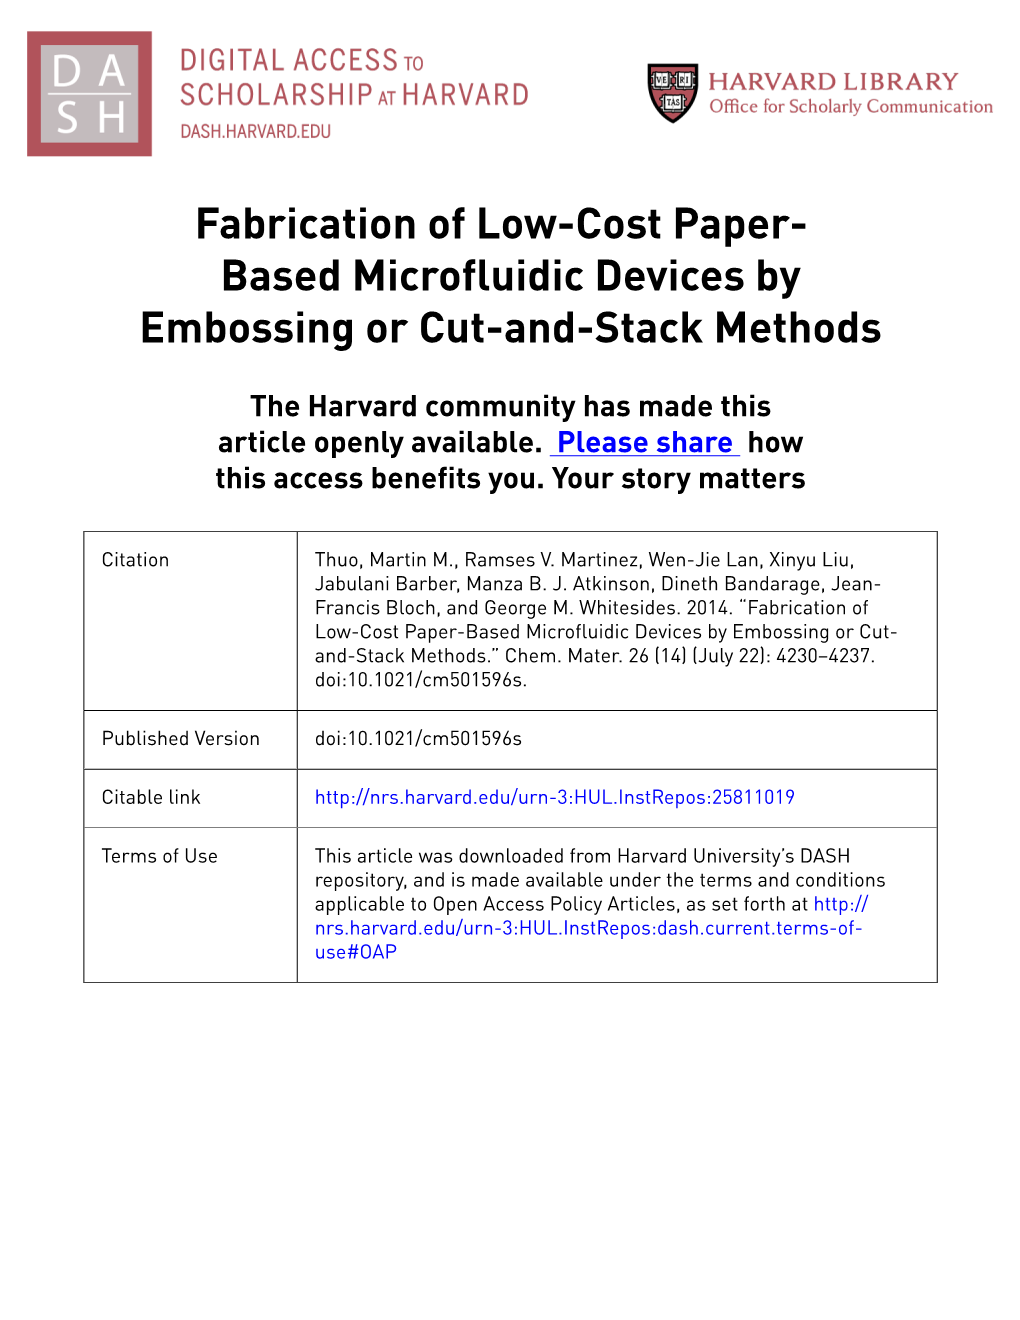 Fabrication of Low-Cost Paper- Based Microfluidic Devices by Embossing Or Cut-And-Stack Methods